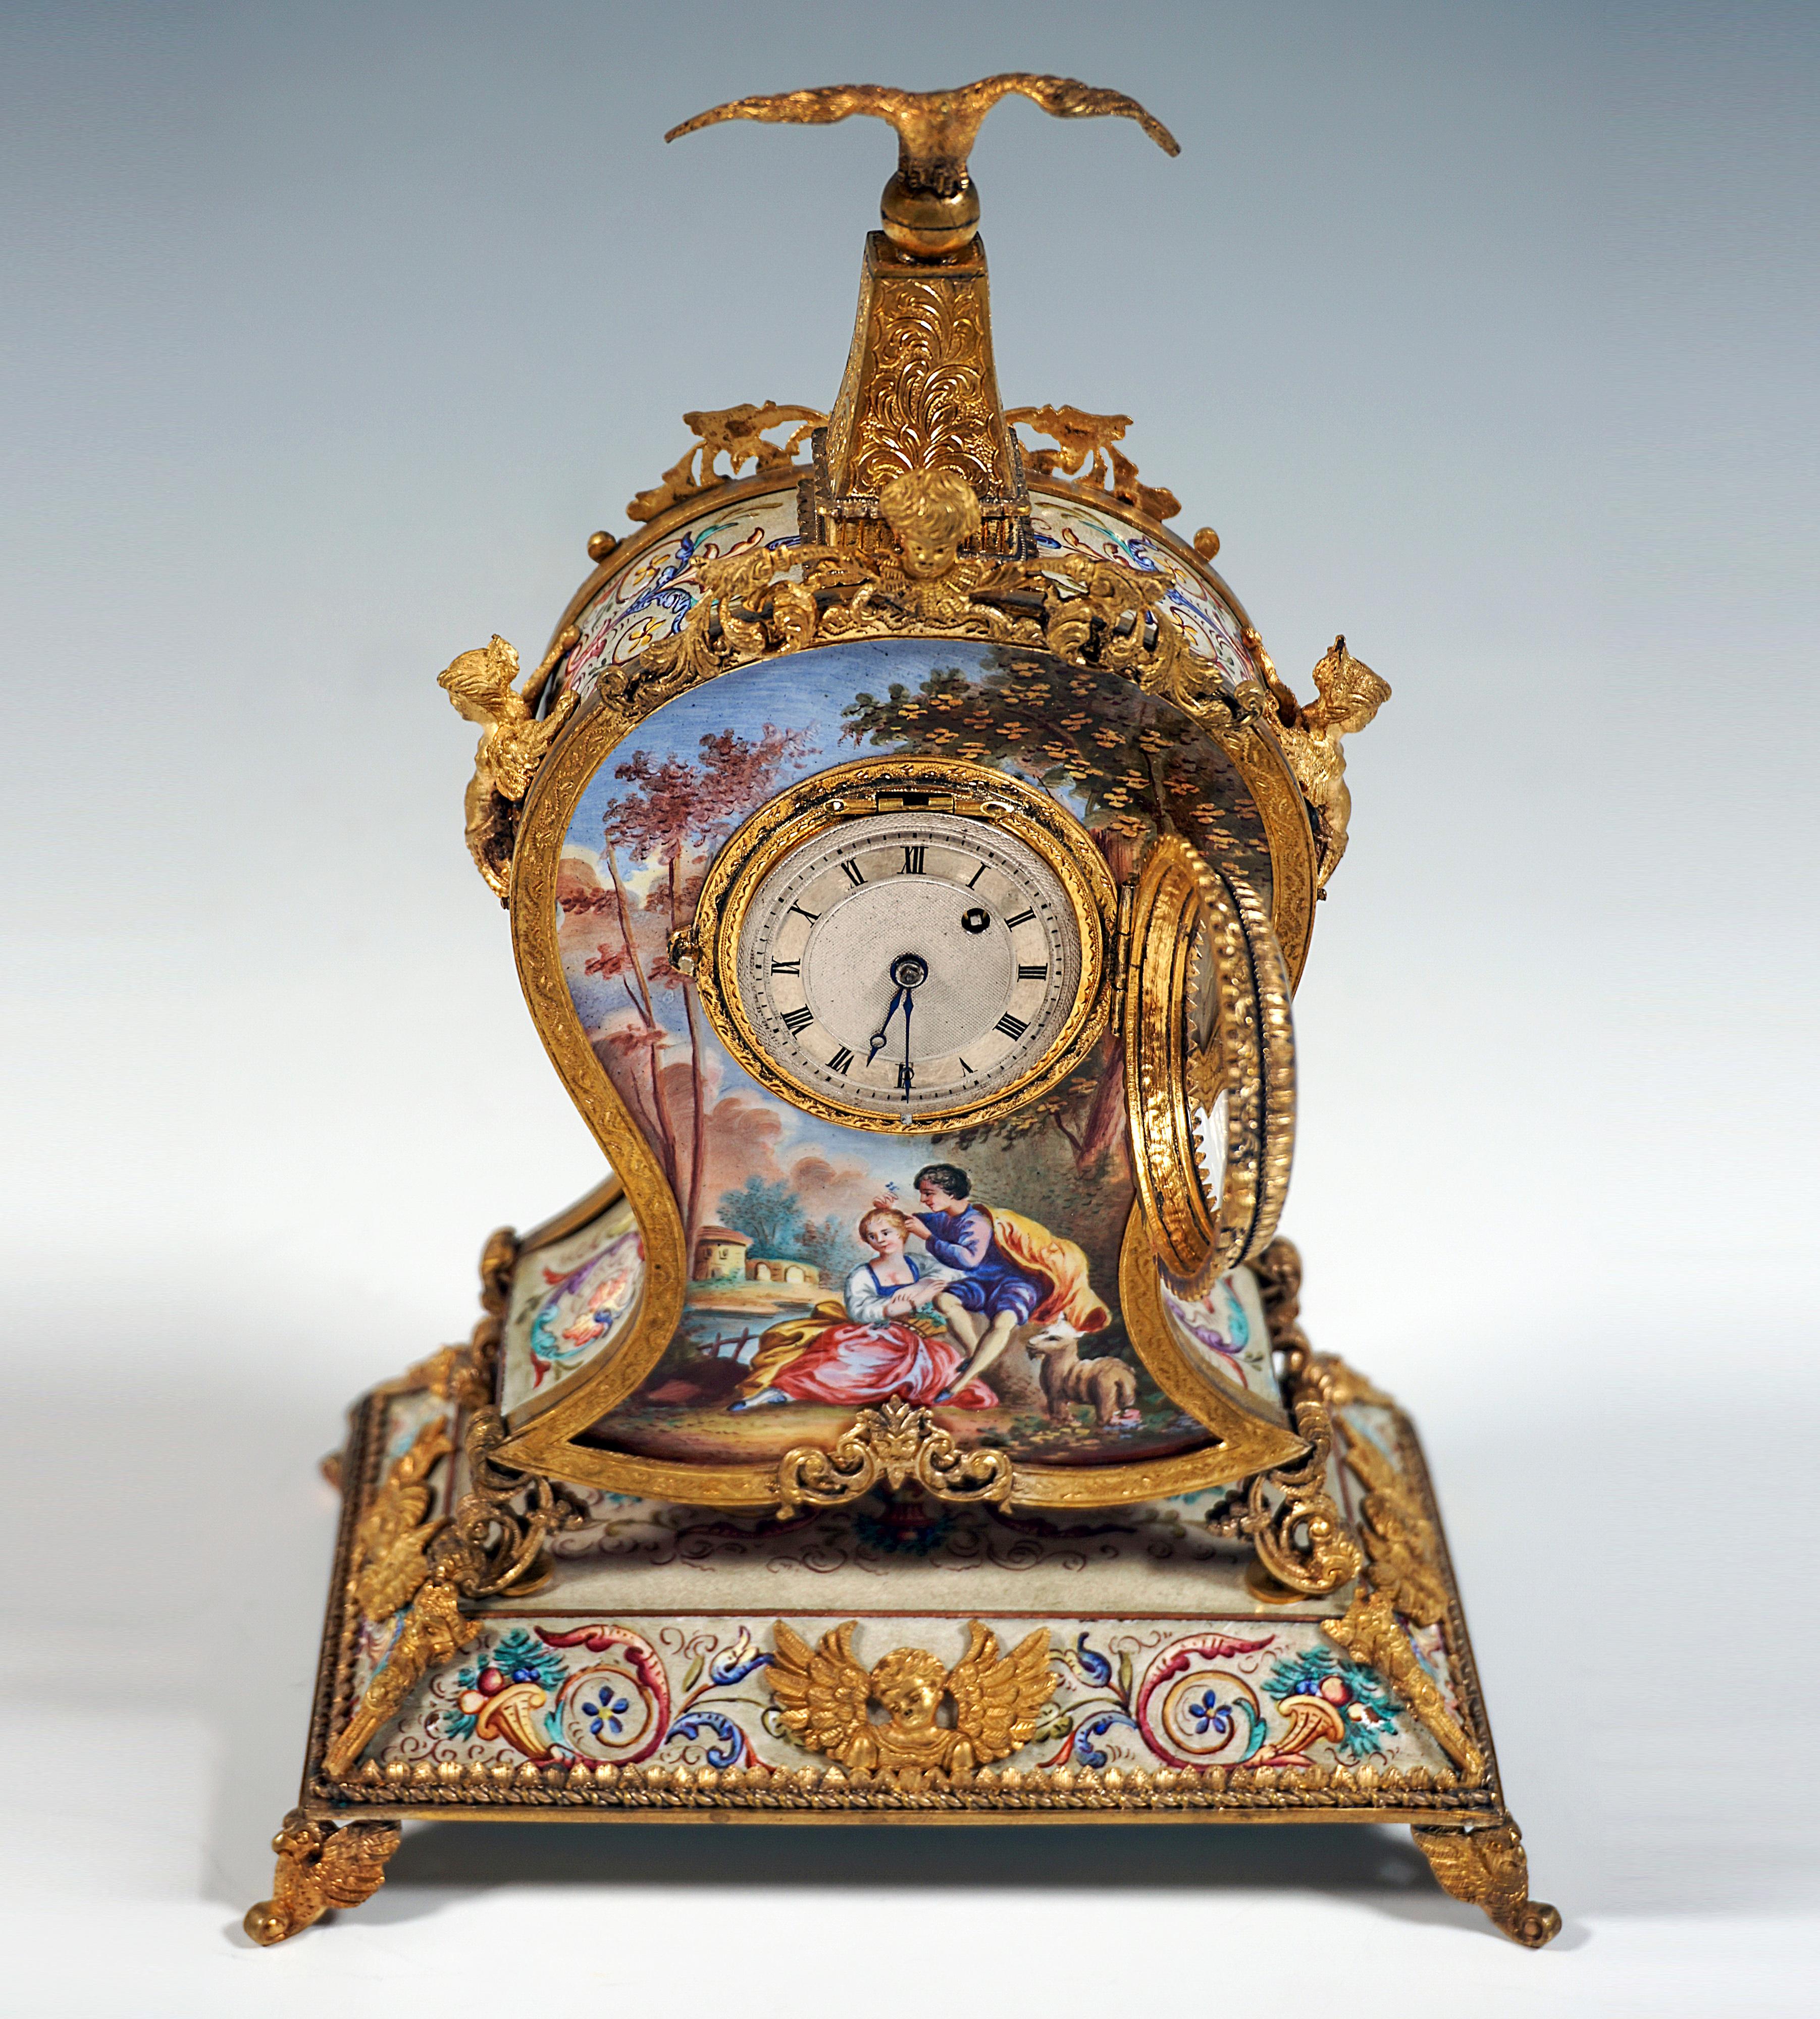 Hand-Crafted  Viennese Gilt Silver & Enamel Table Clock With Gallant Scenes Painting, Ca 1880